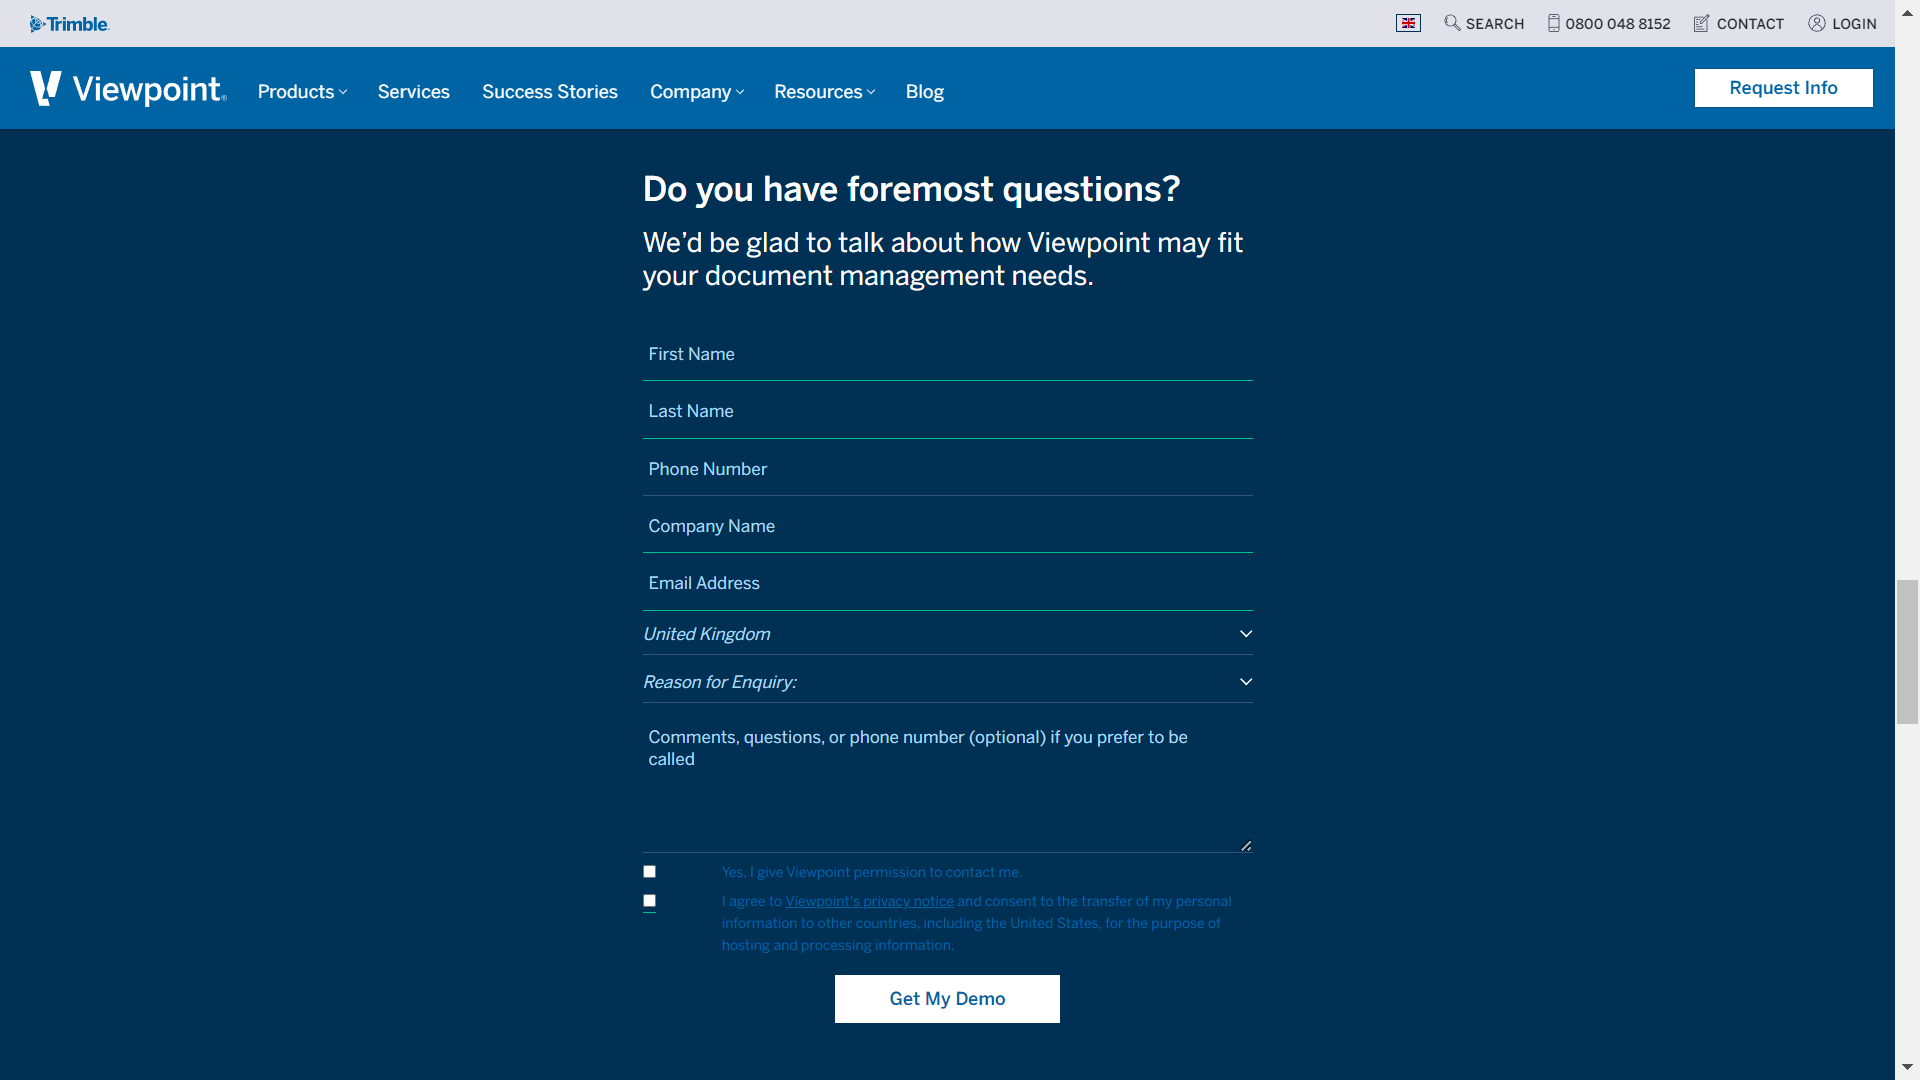 Viewpoint's product demo request page screenshot